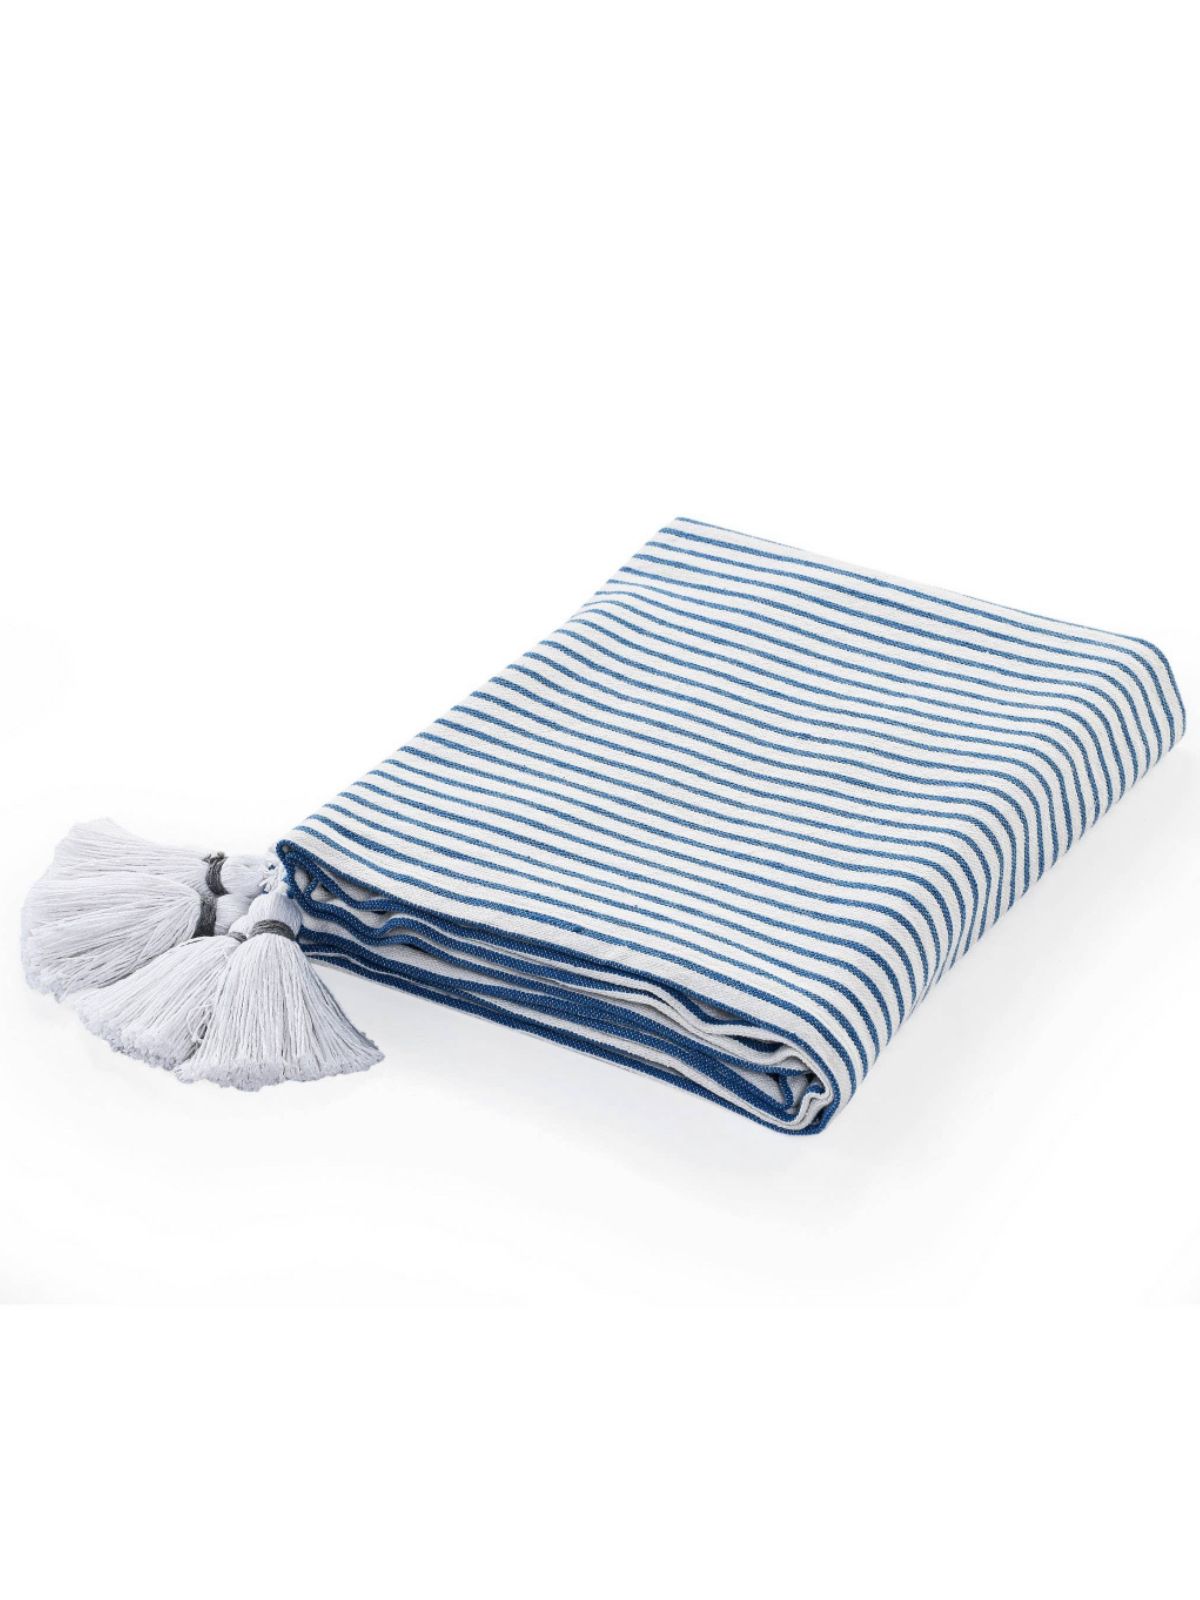 Blue and Ivory Striped 100% Cotton Decorative Throw Blanket with Tassels, 50W x 60L. 